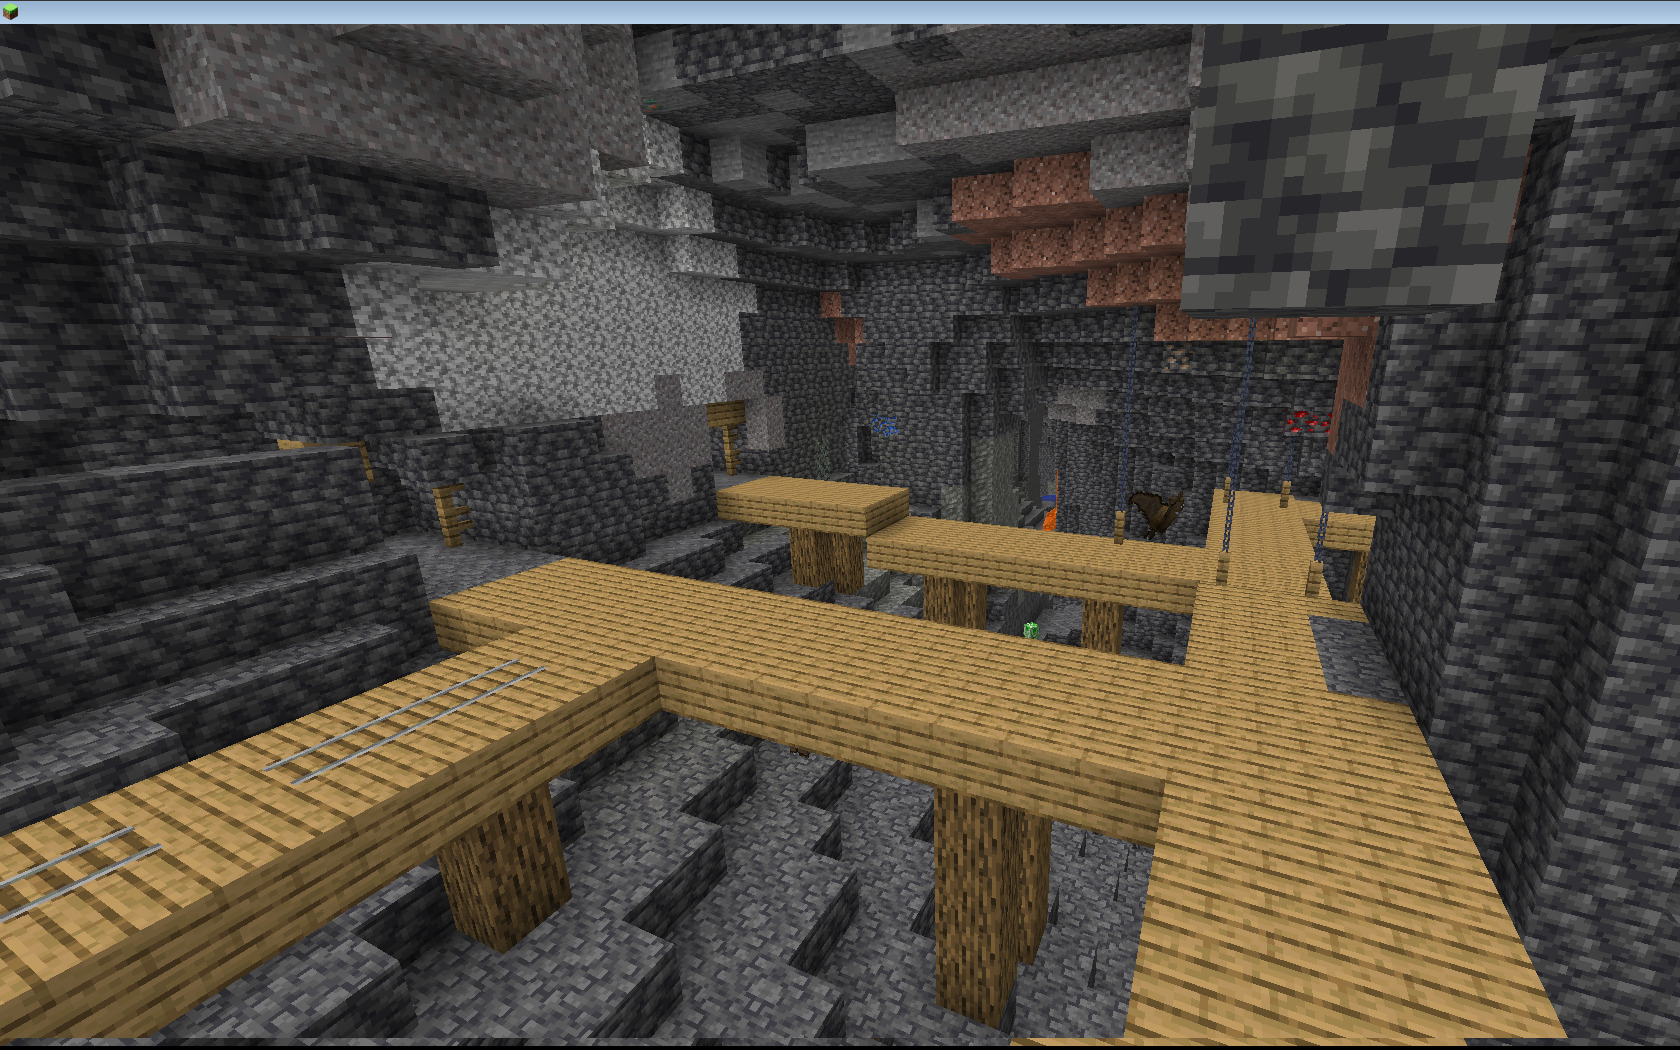 A screenshot showing an Abandoned Mineshaft in Minecraft